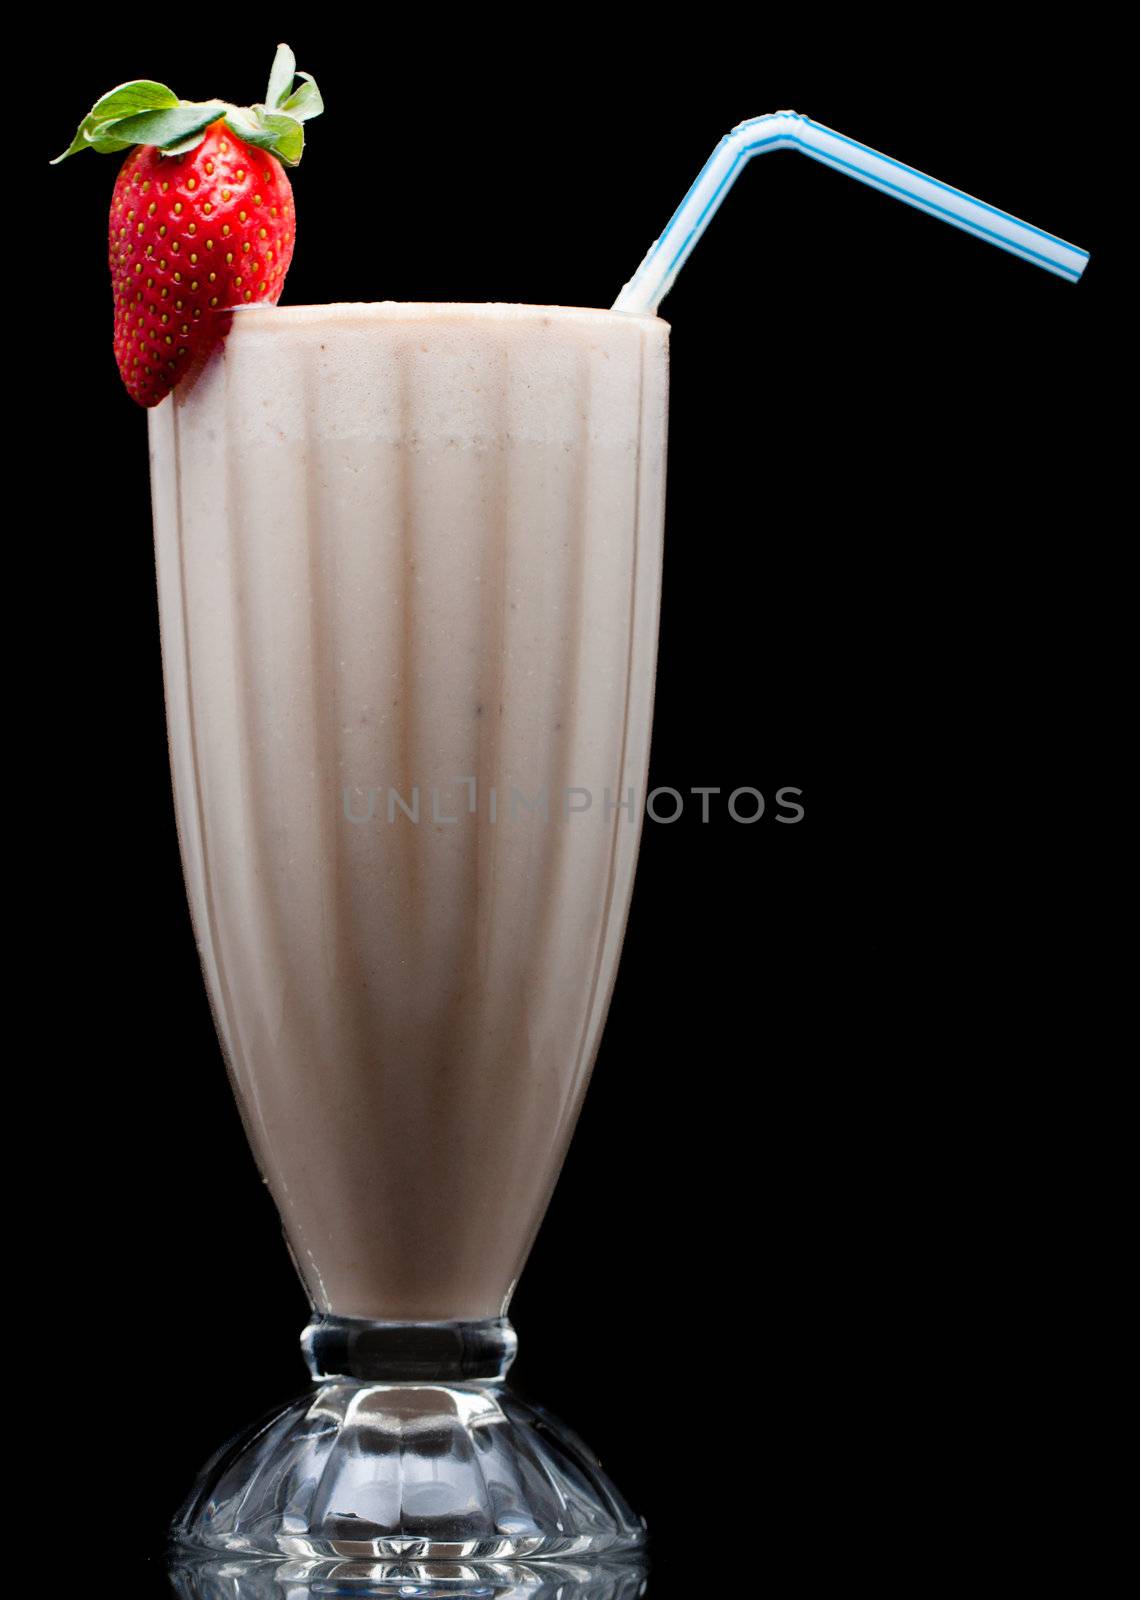 A delicious cold fruit smoothie or milk shake decorated with strawberry. Isolated on black